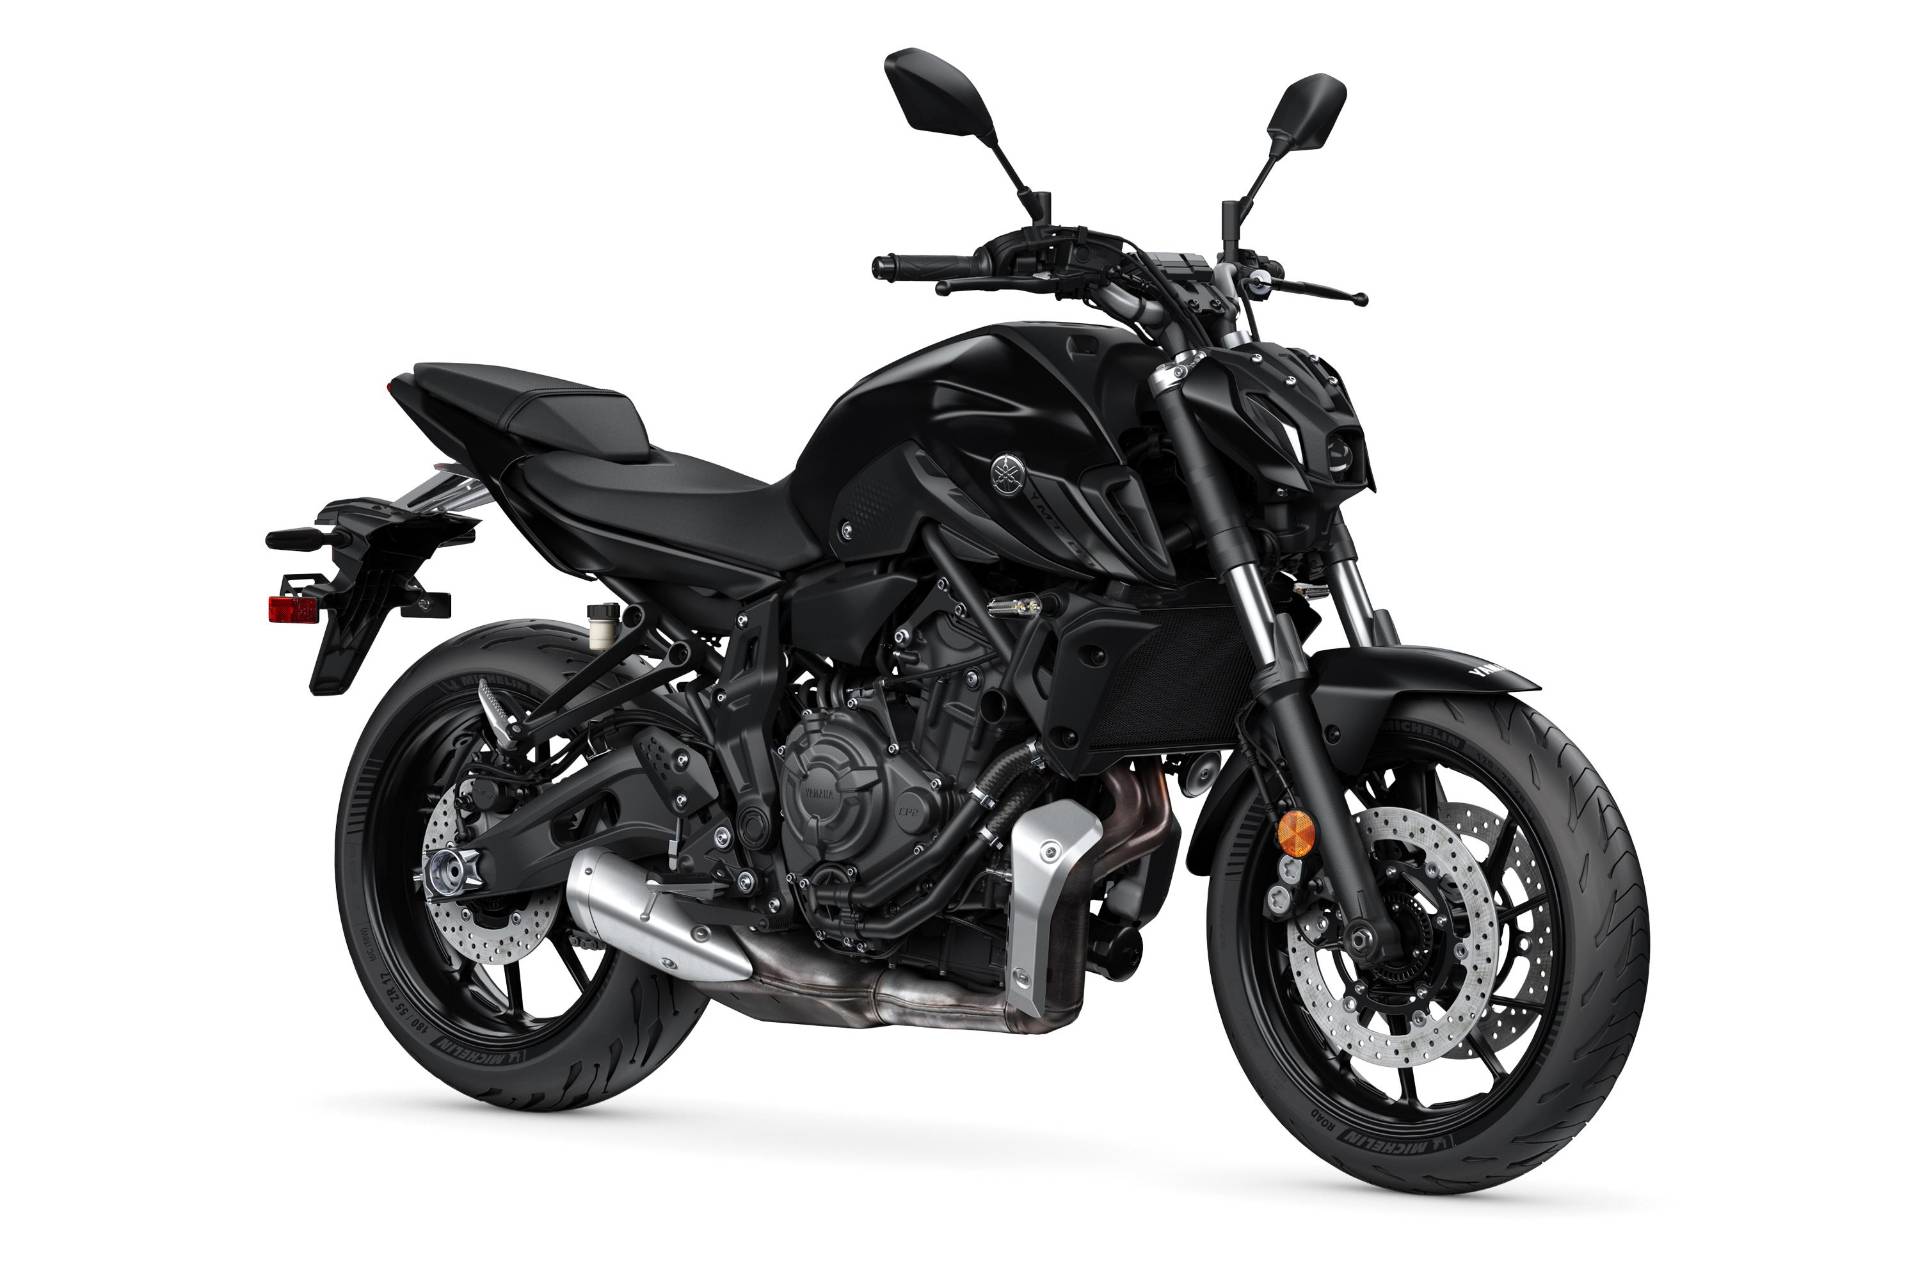 New 2021 Yamaha MT-09 Motorcycles in Clearwater, FL 